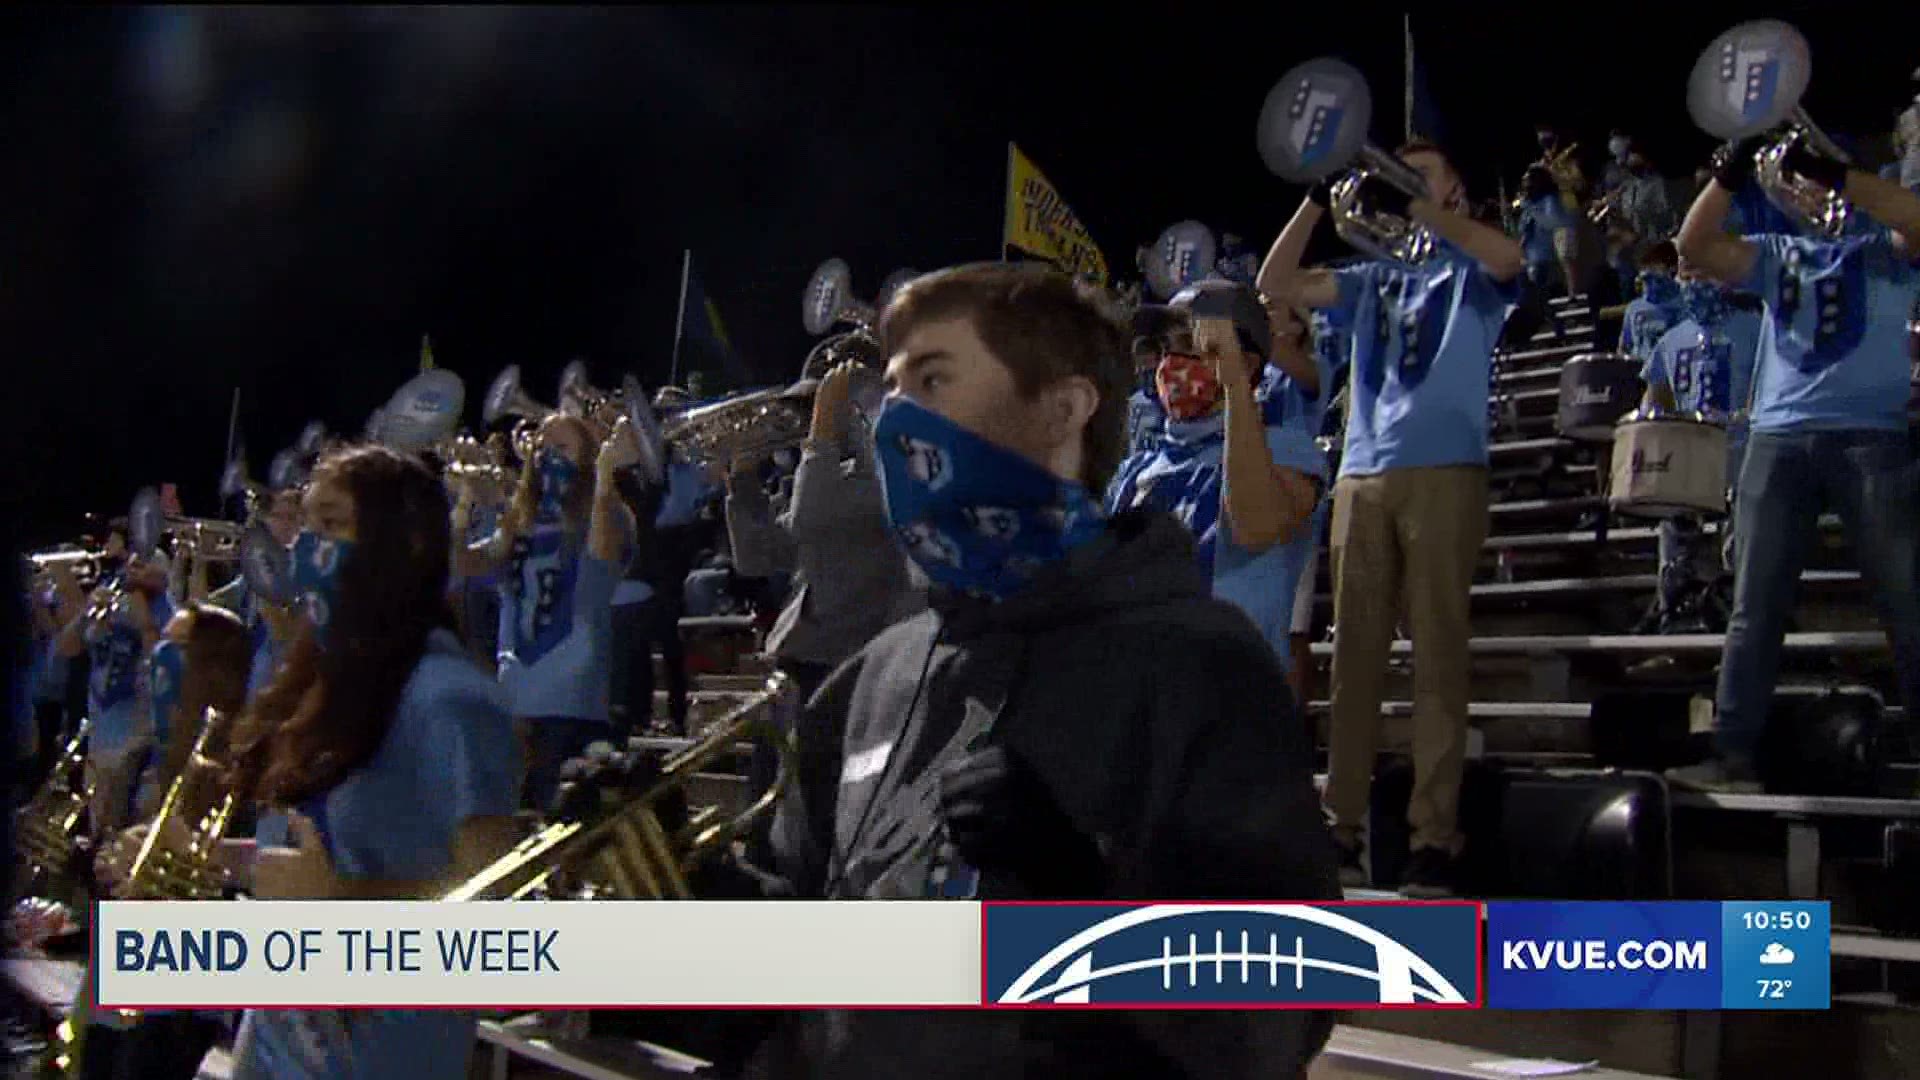 KVUE's Band of the Week is Georgetown High School. Join us for Friday Football Fever.